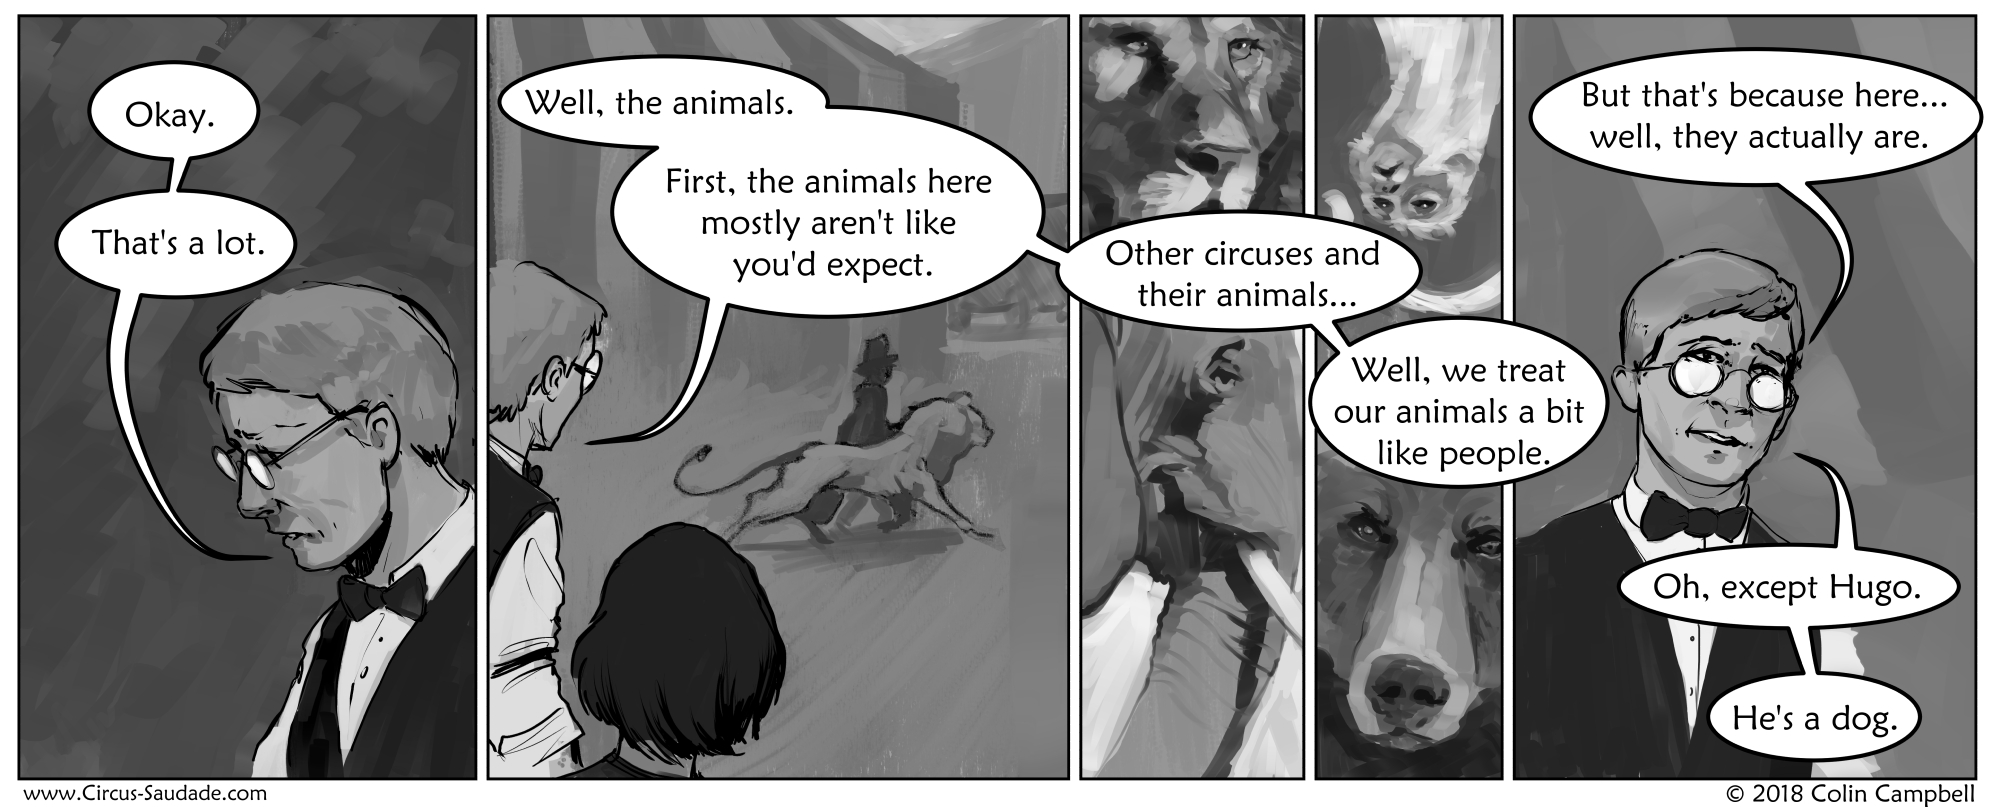 Some Thoughts on Animals